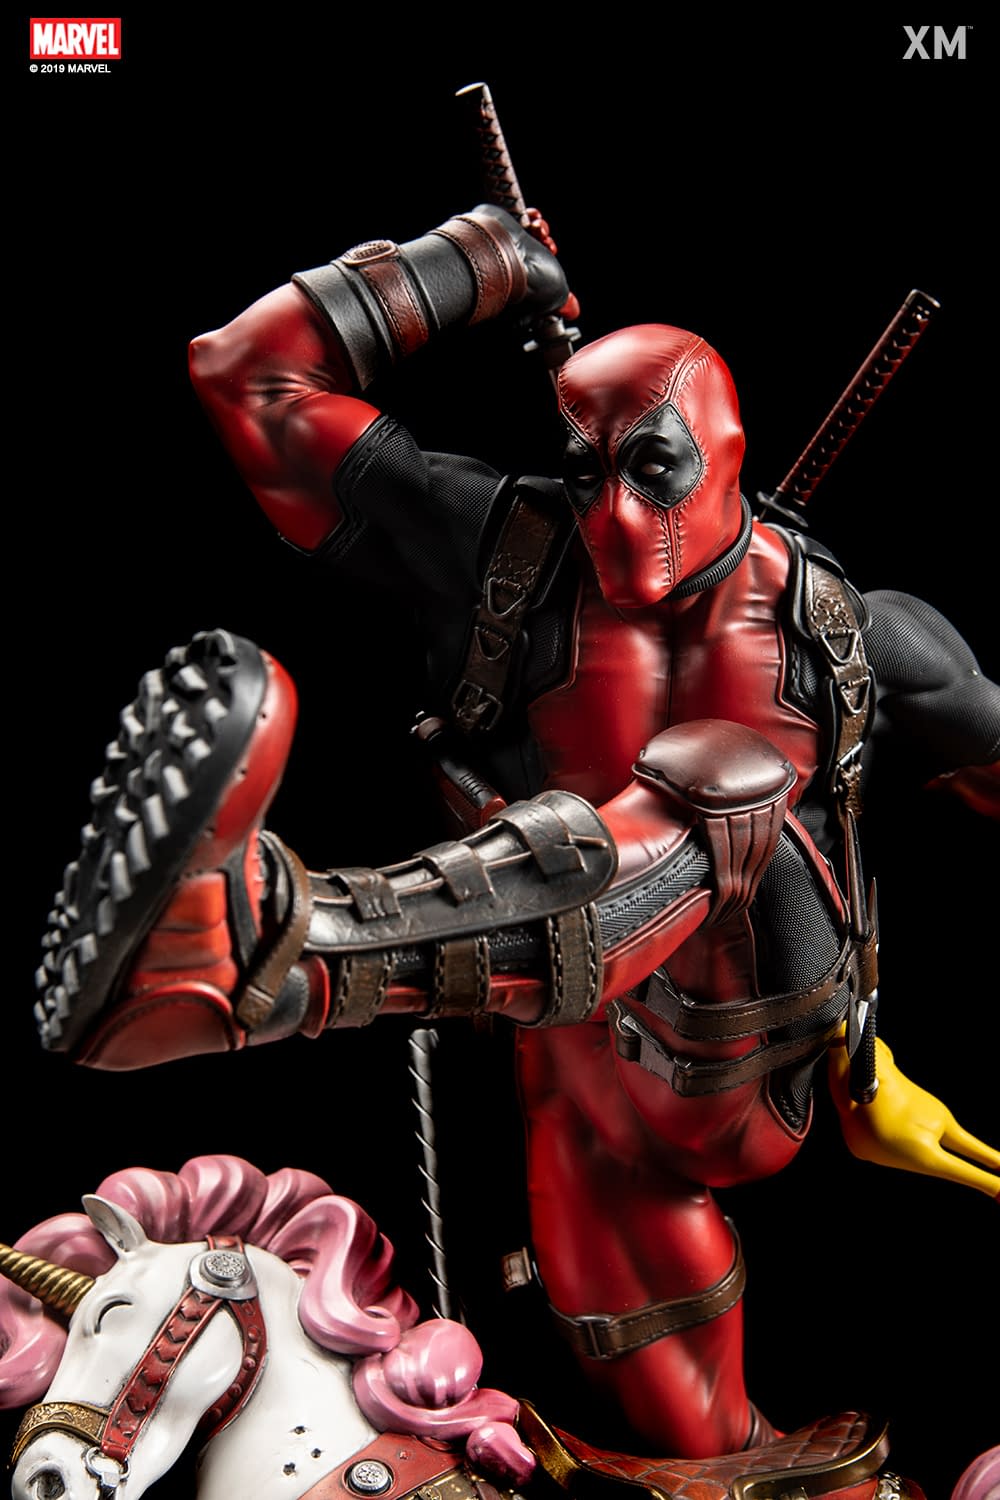 Deadpool Gets a Magically Hand-Crafted Statue from XM Studios